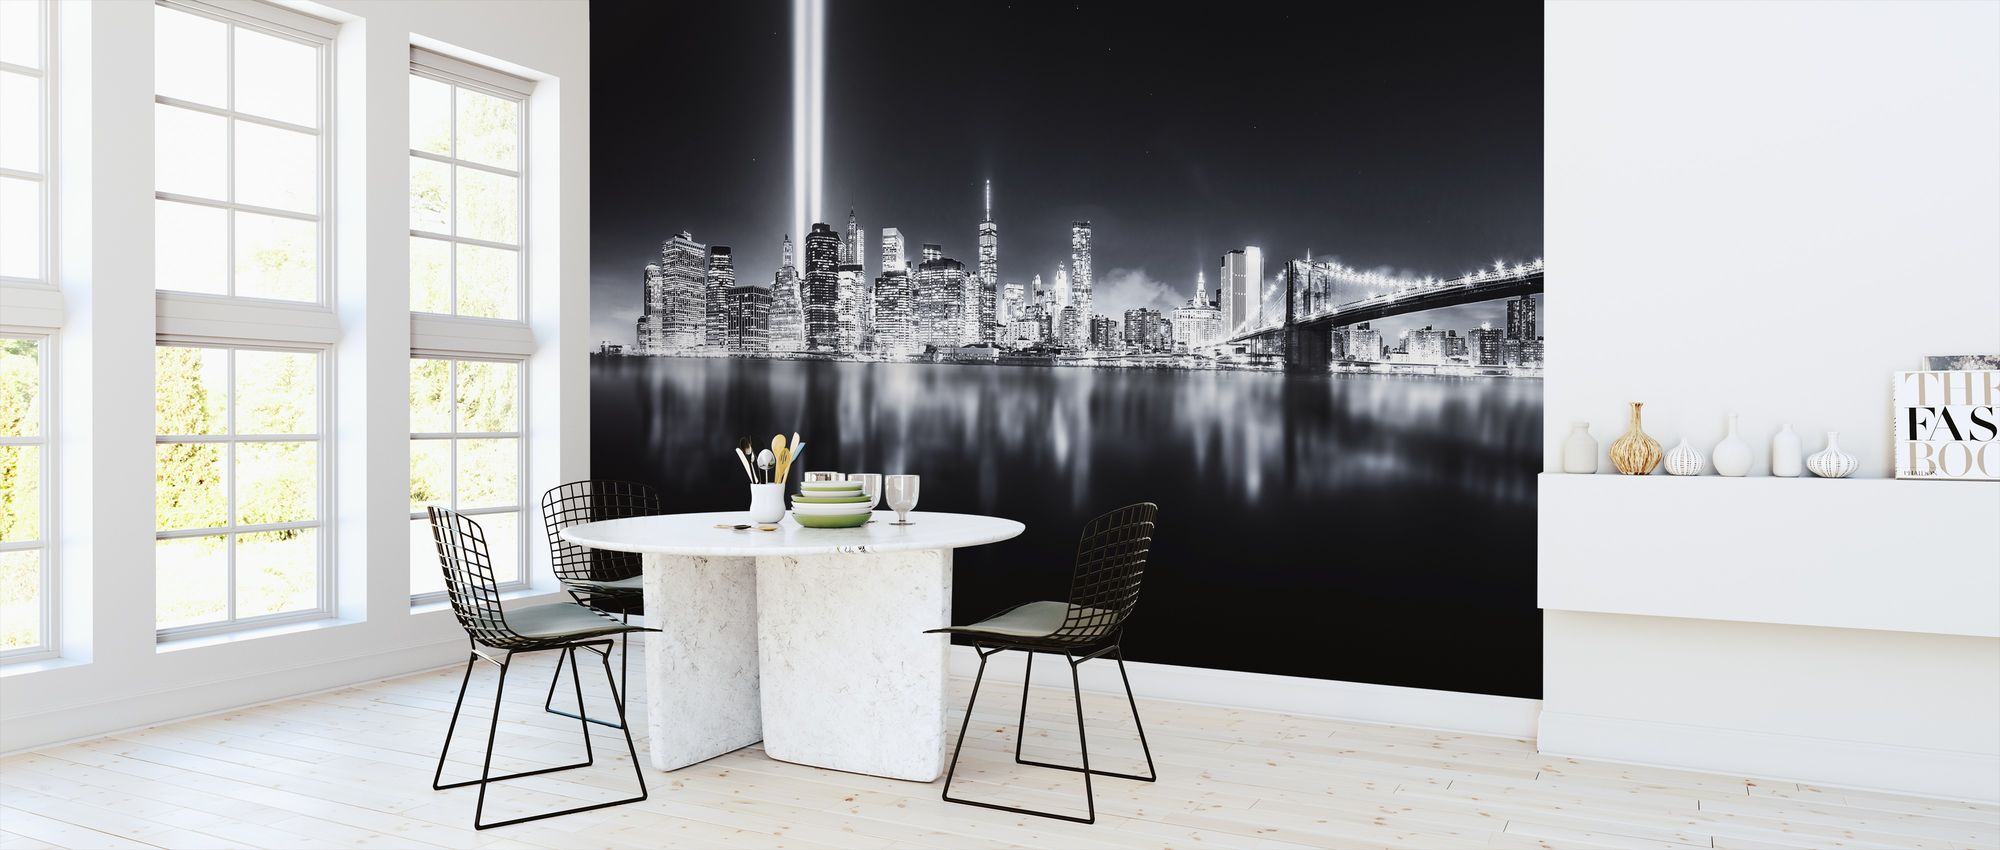 Unforgettable 11b High Quality Wall Murals With Us